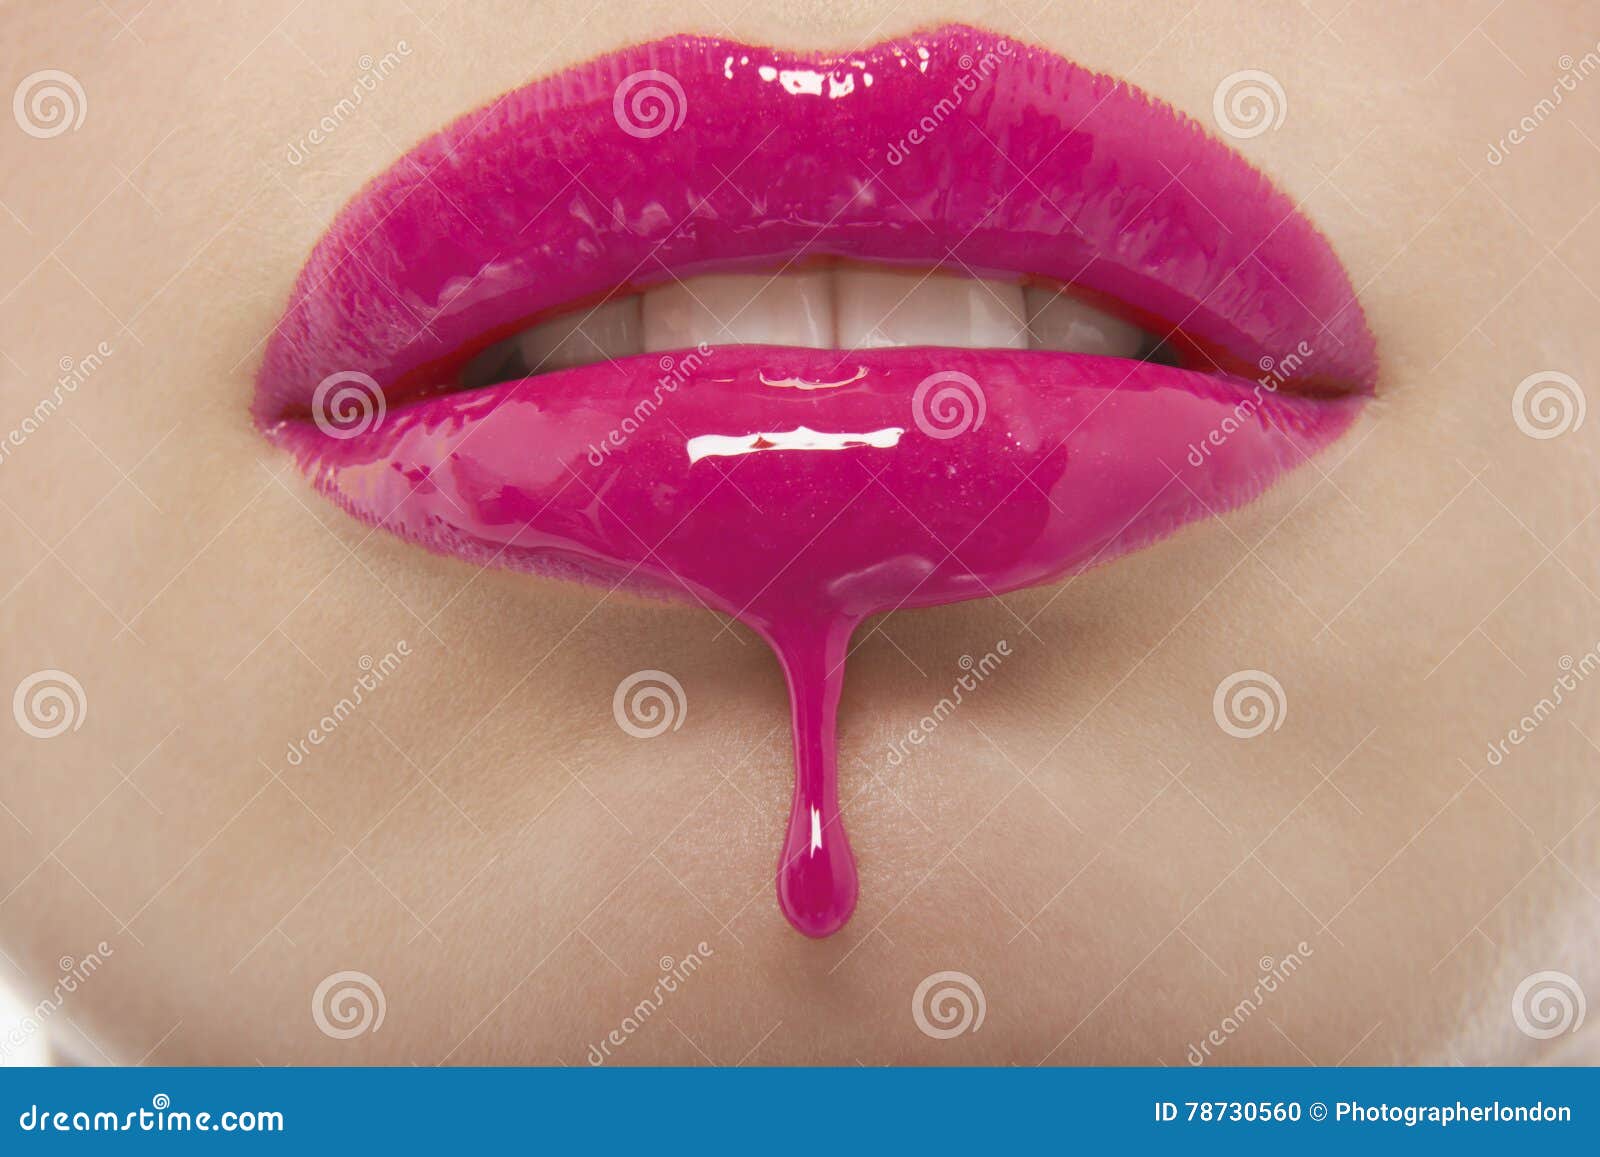 detail shot of pink lipgloss dripping from woman's lips